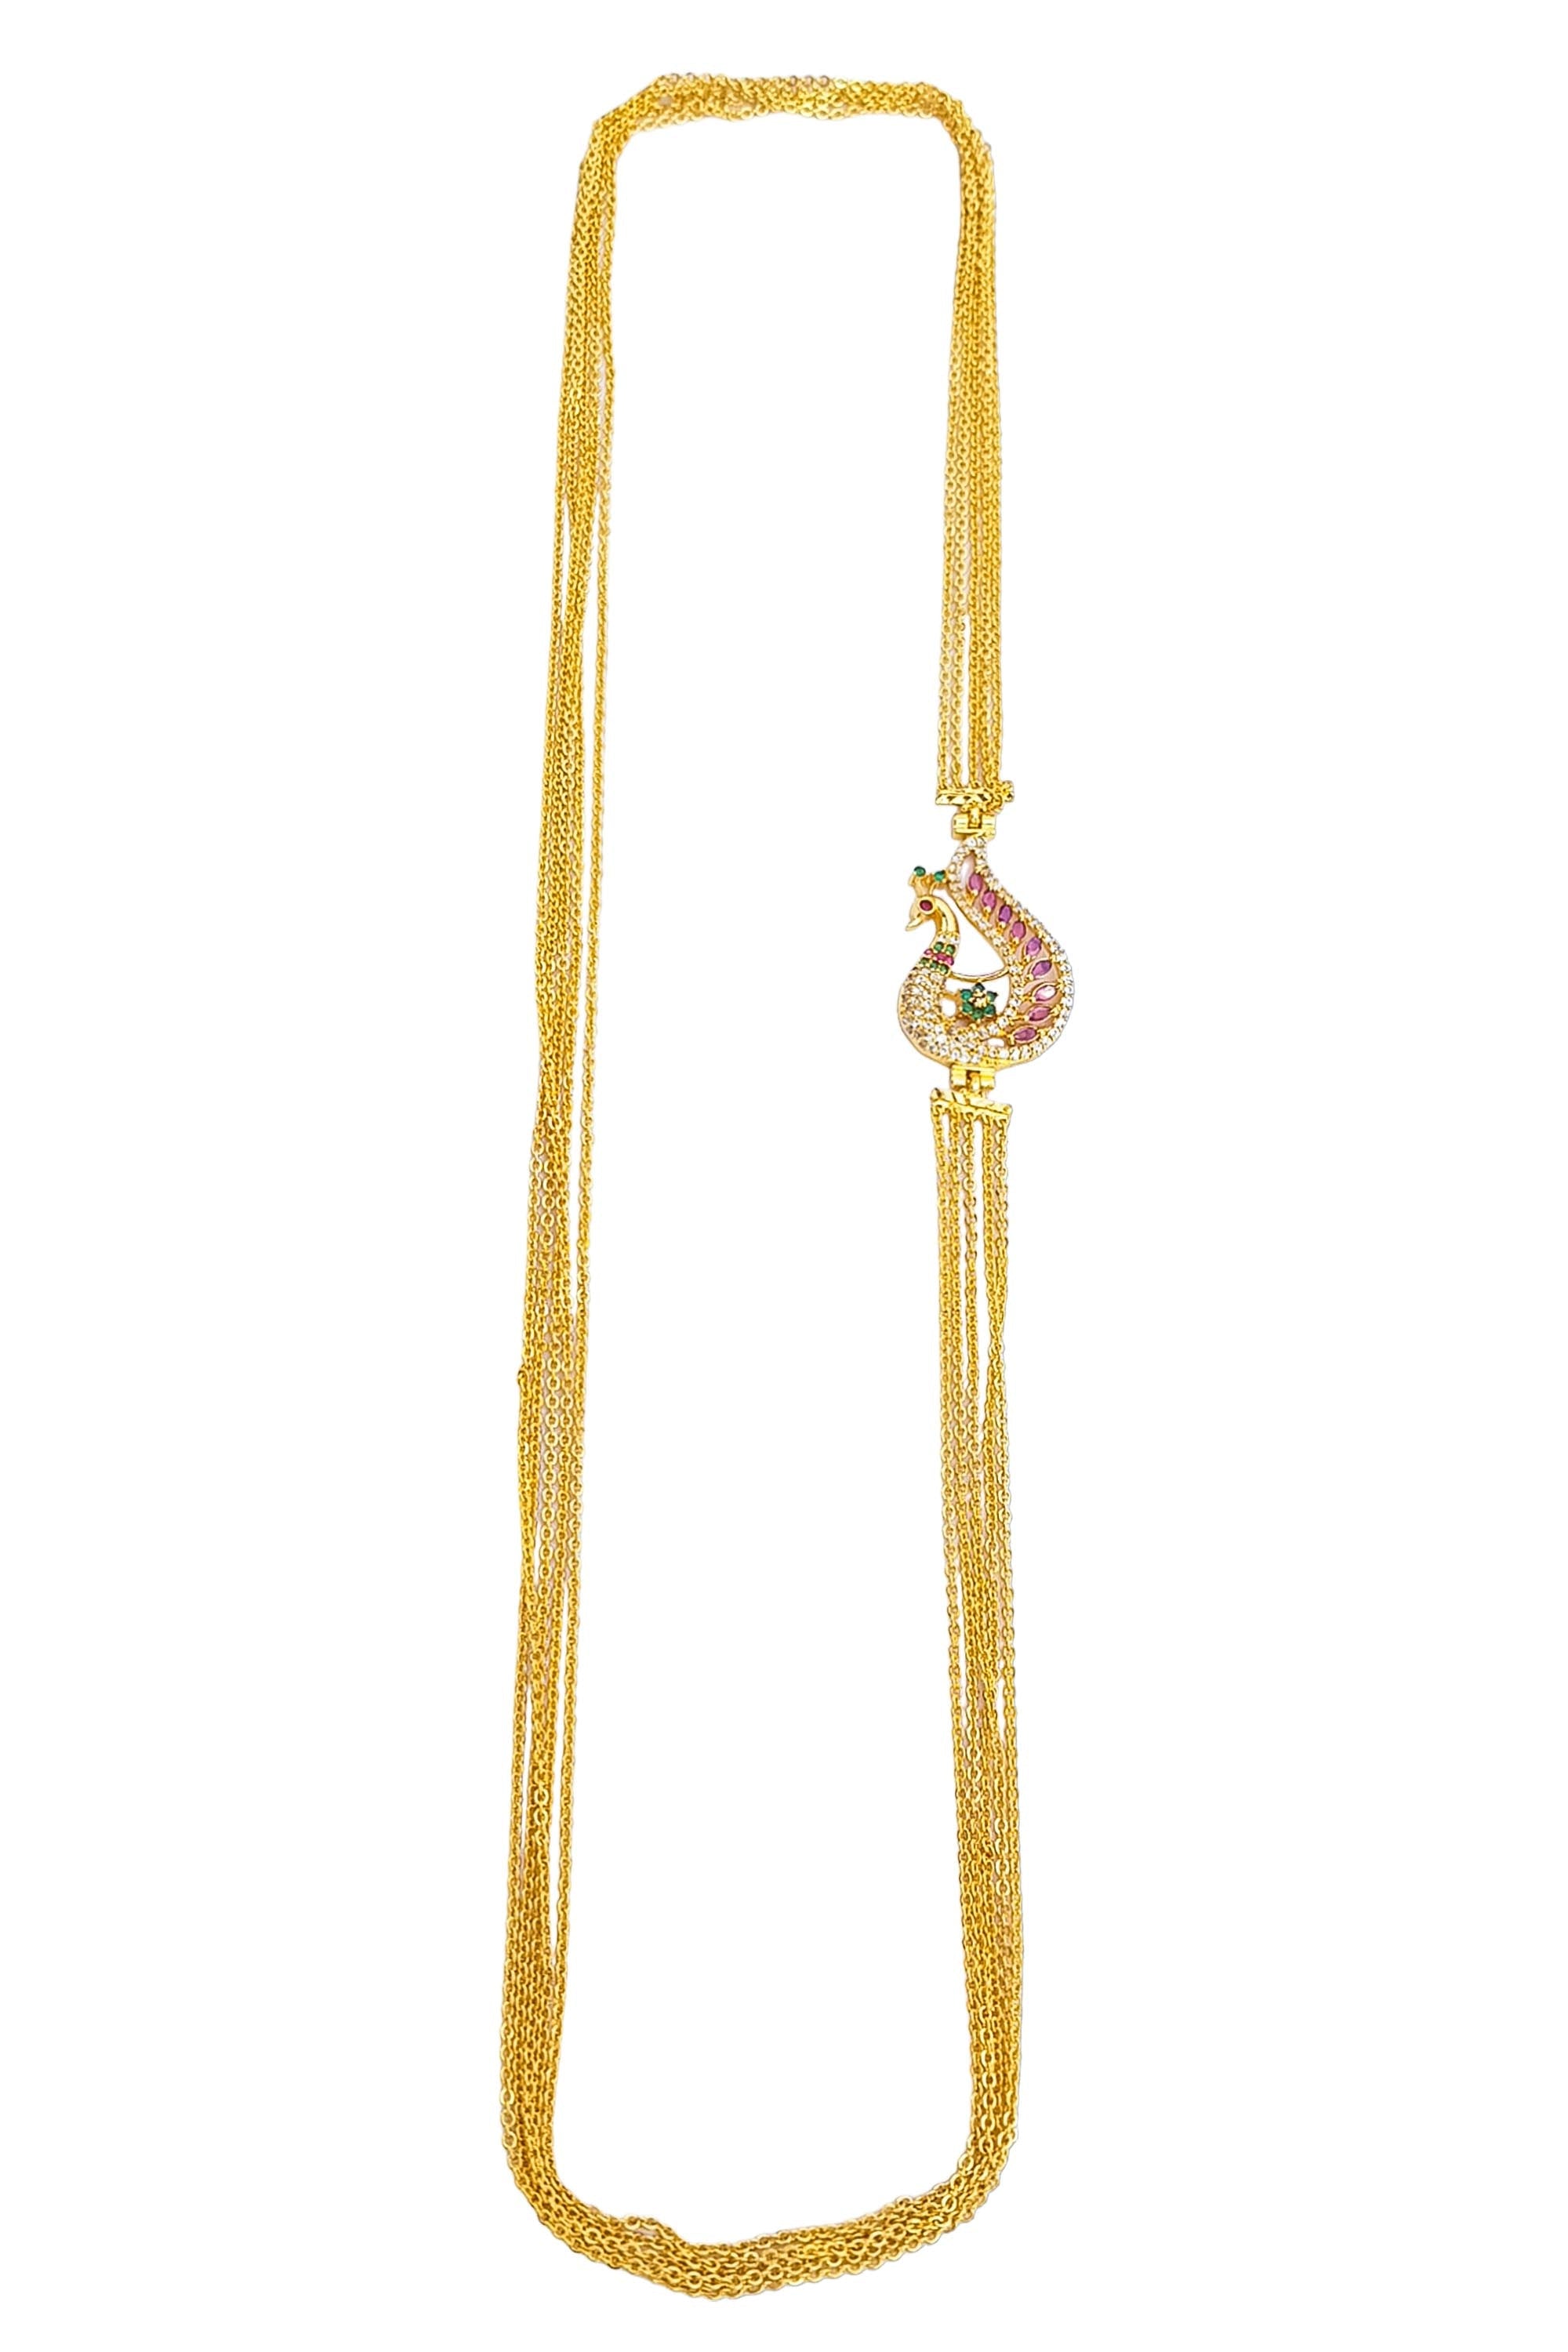 MicroGold Plated CZ Studded 5 Layer Mopu Chain 18139N